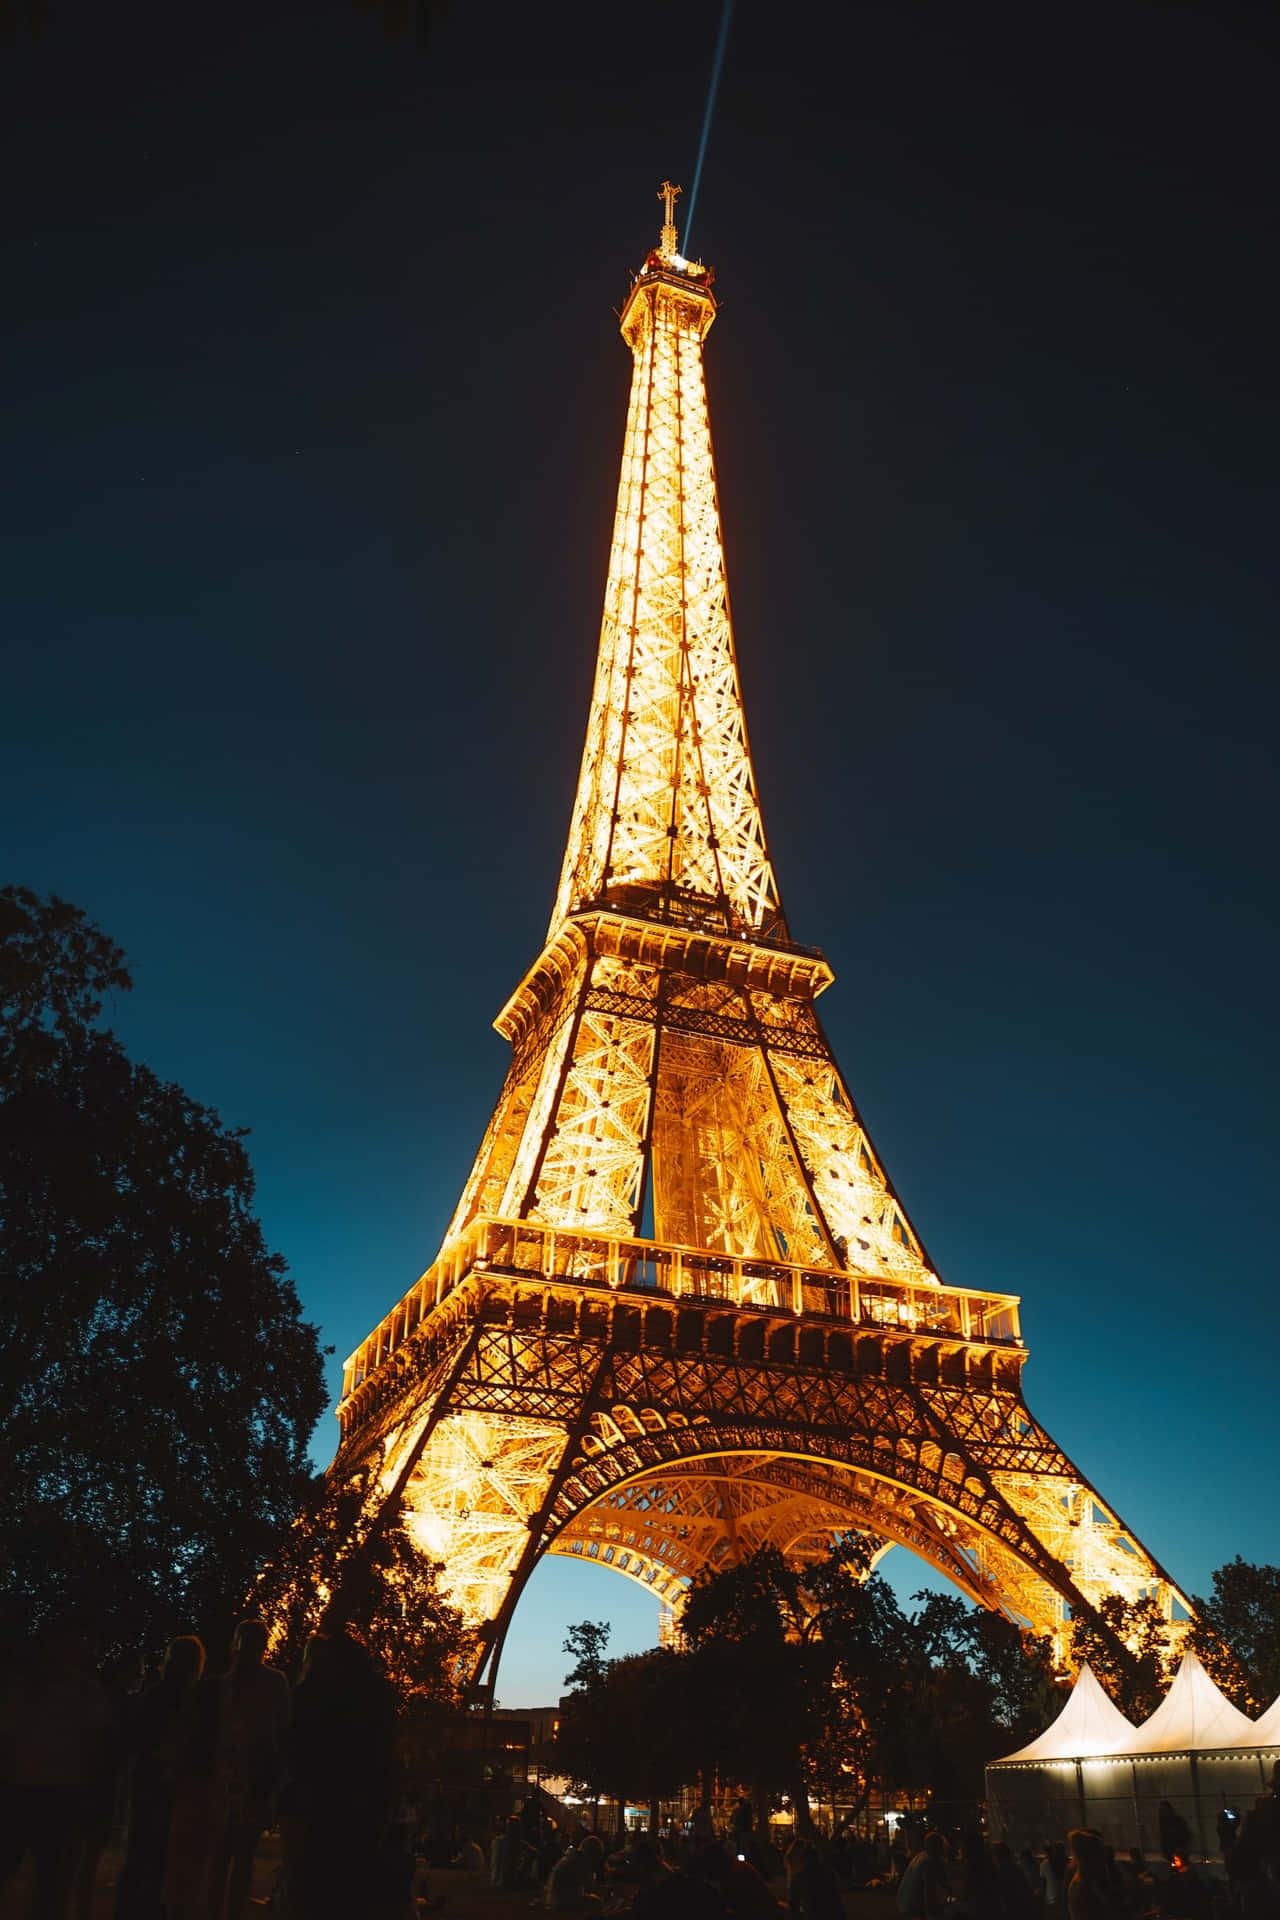 The Eiffel Tower Lit Up At Night